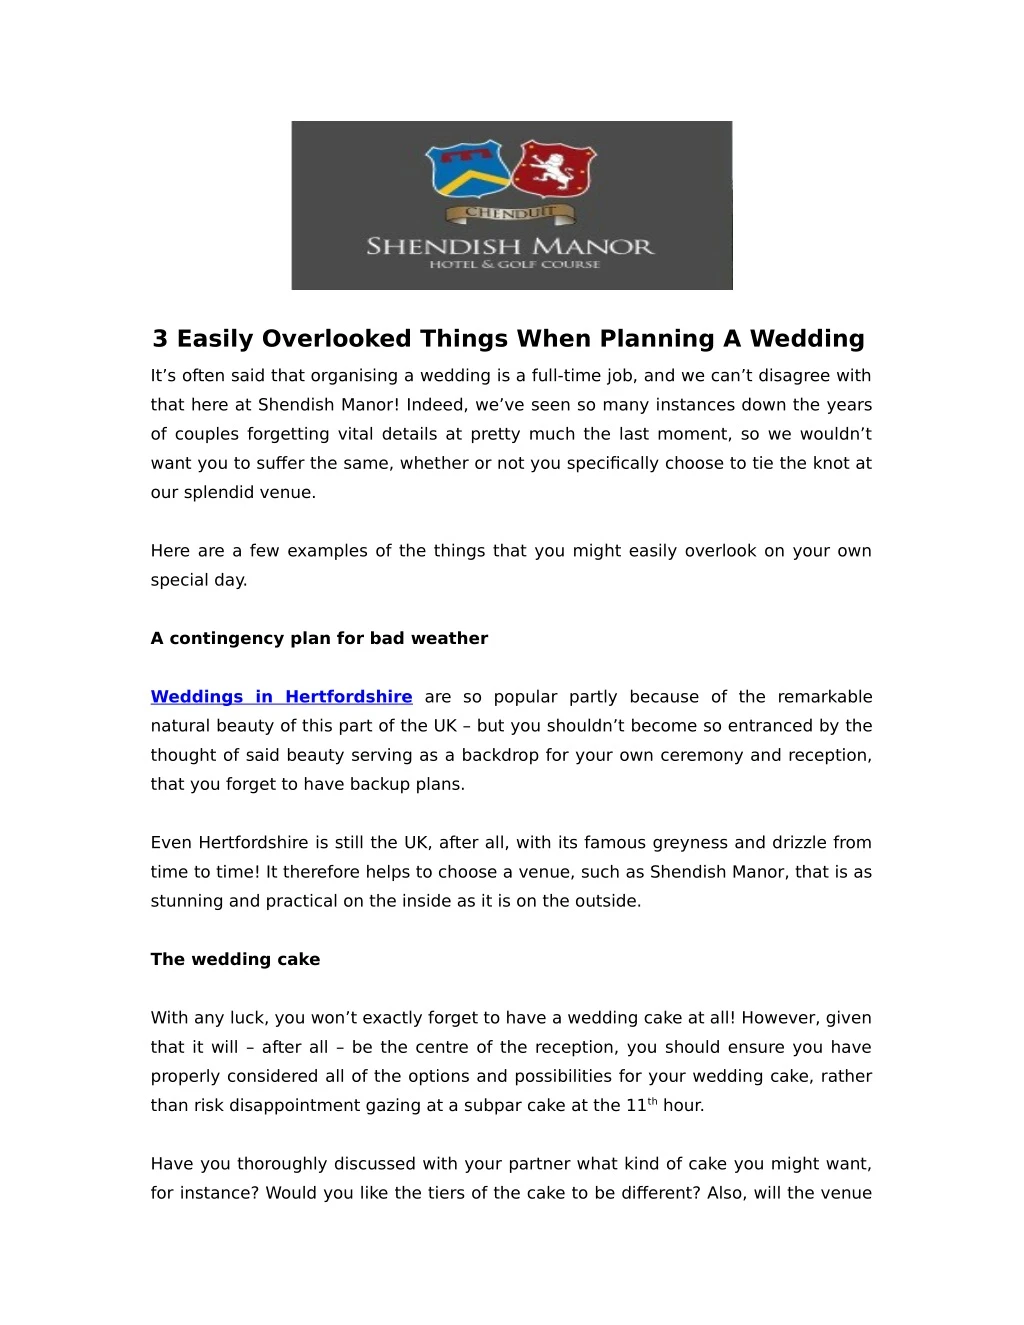 3 easily overlooked things when planning a wedding